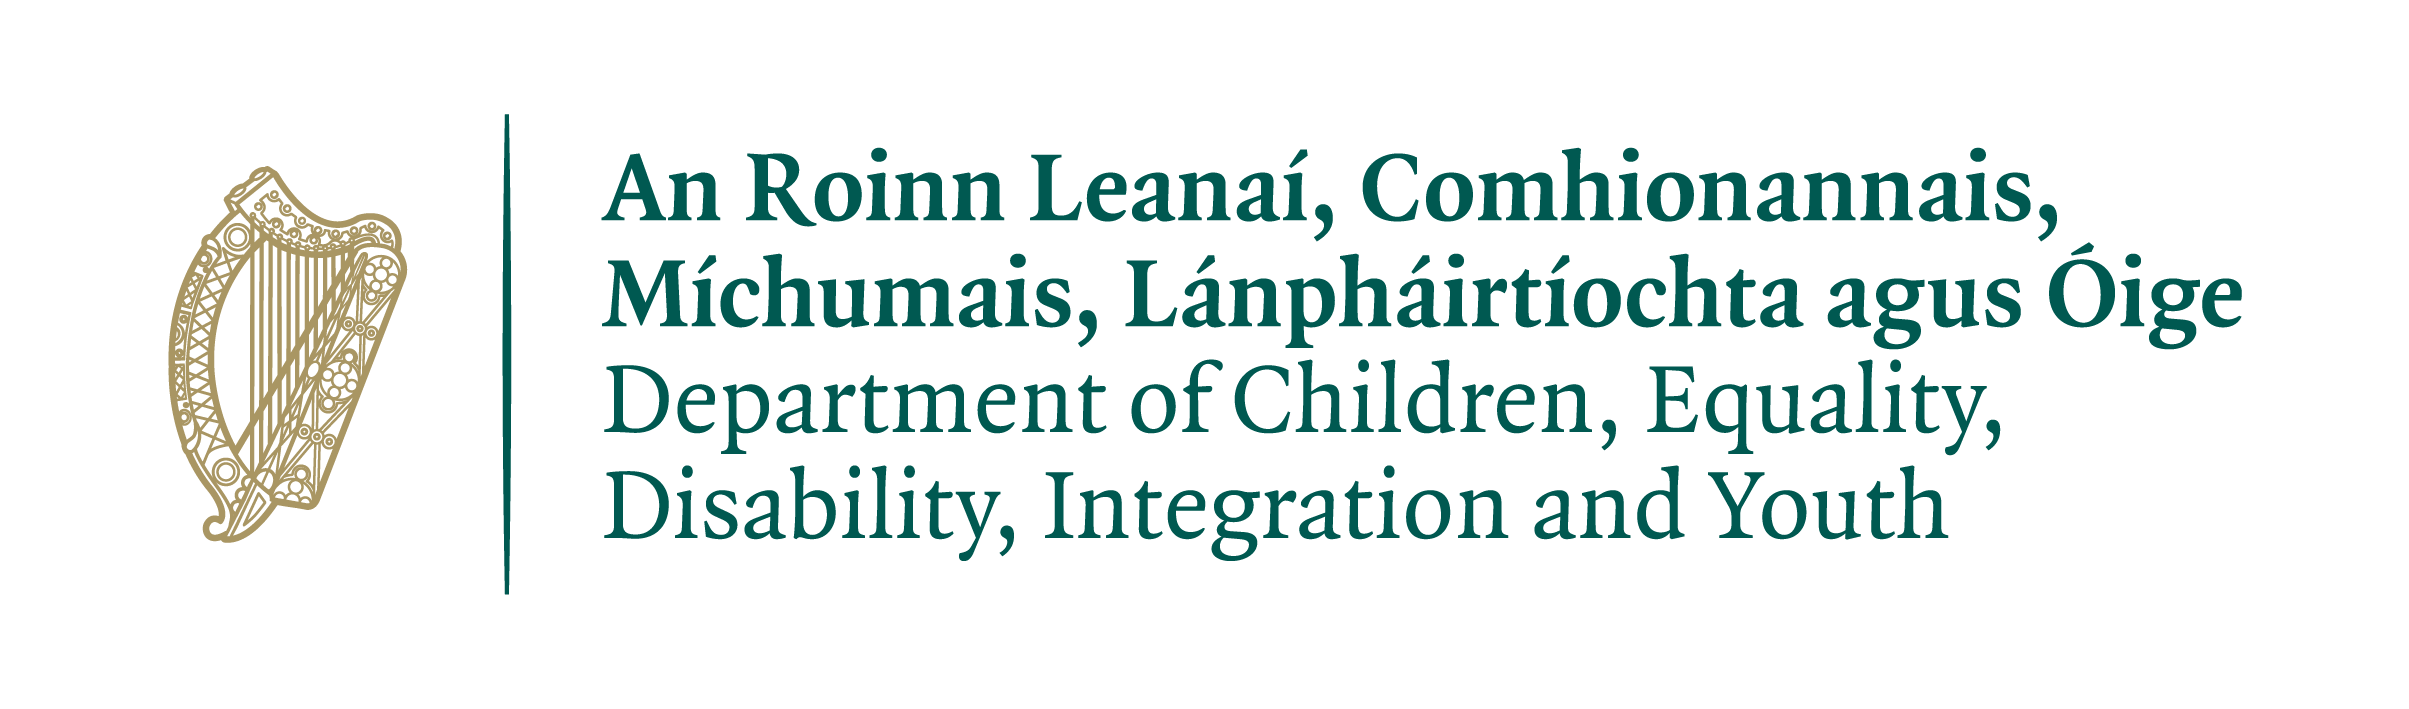 Department of children equality disability integration and youth